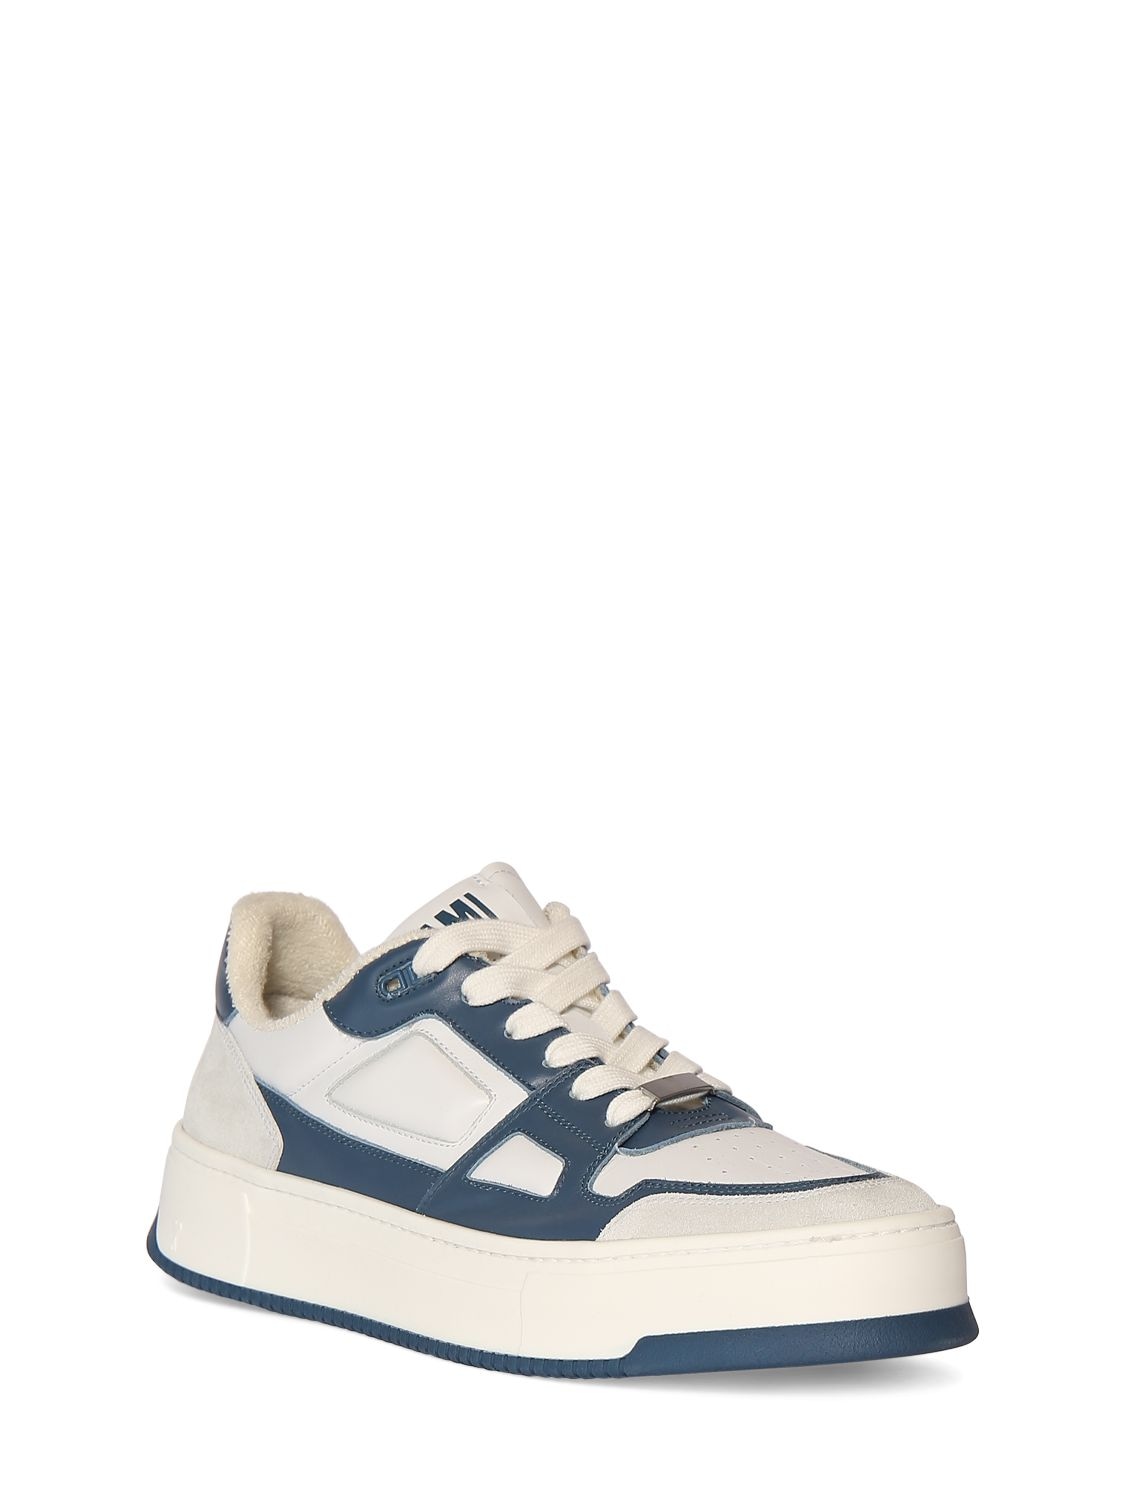 Shop Ami Alexandre Mattiussi New Arcade Leather Low Top Sneakers In White,blue